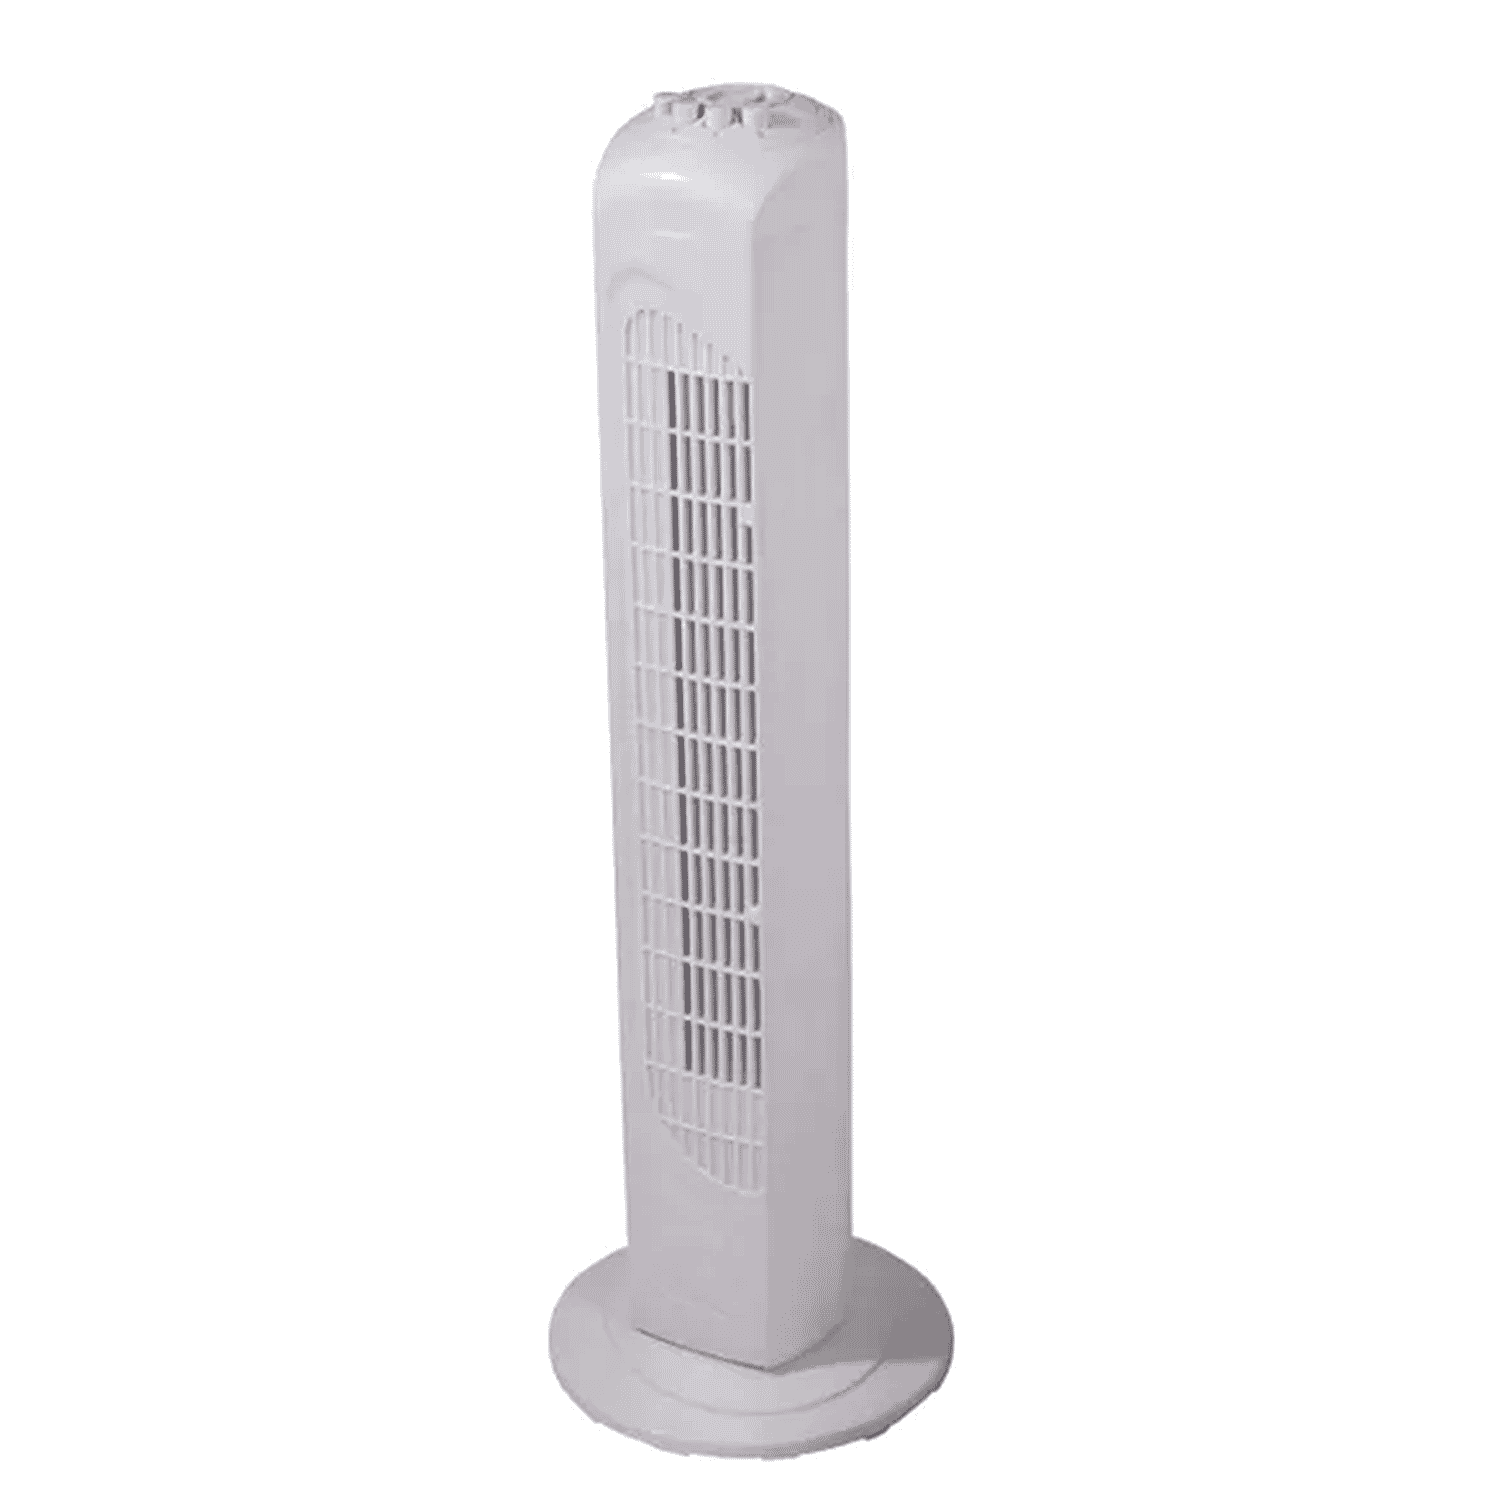 Prem-I-Air Oscillating Tower Fan with Timer